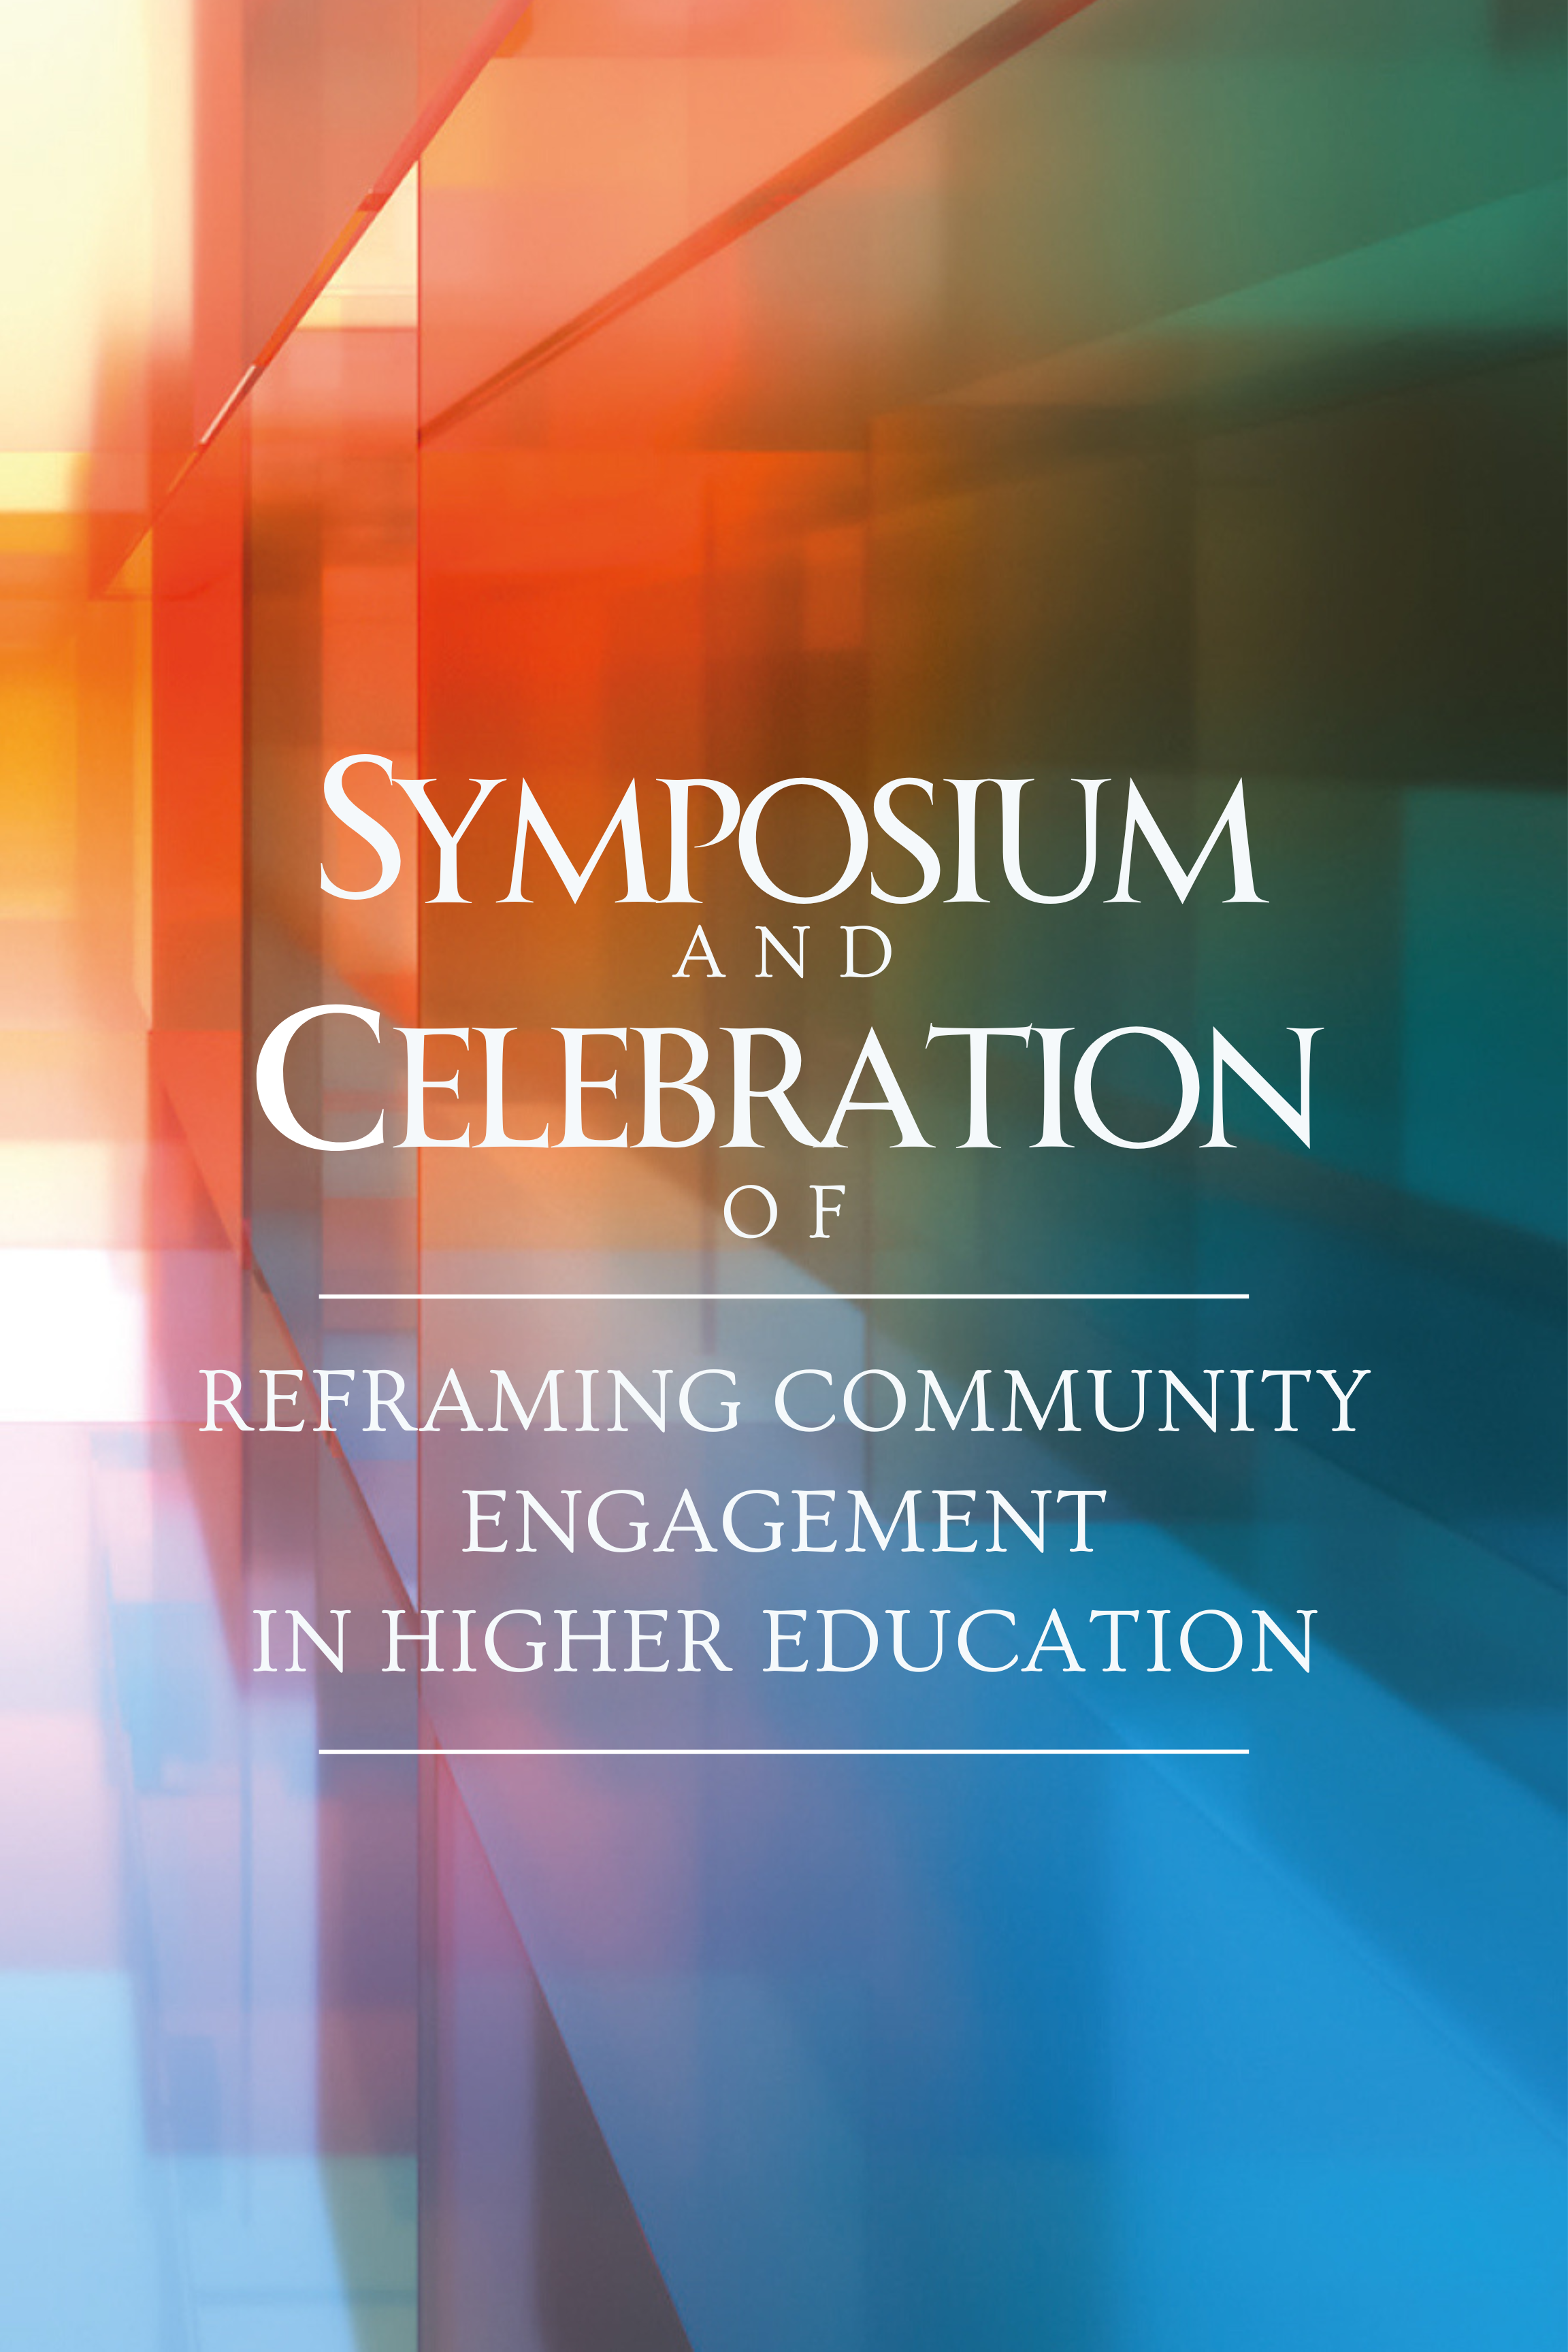 Symposium and Celebration of Reframing Community Engagement in Higher Education